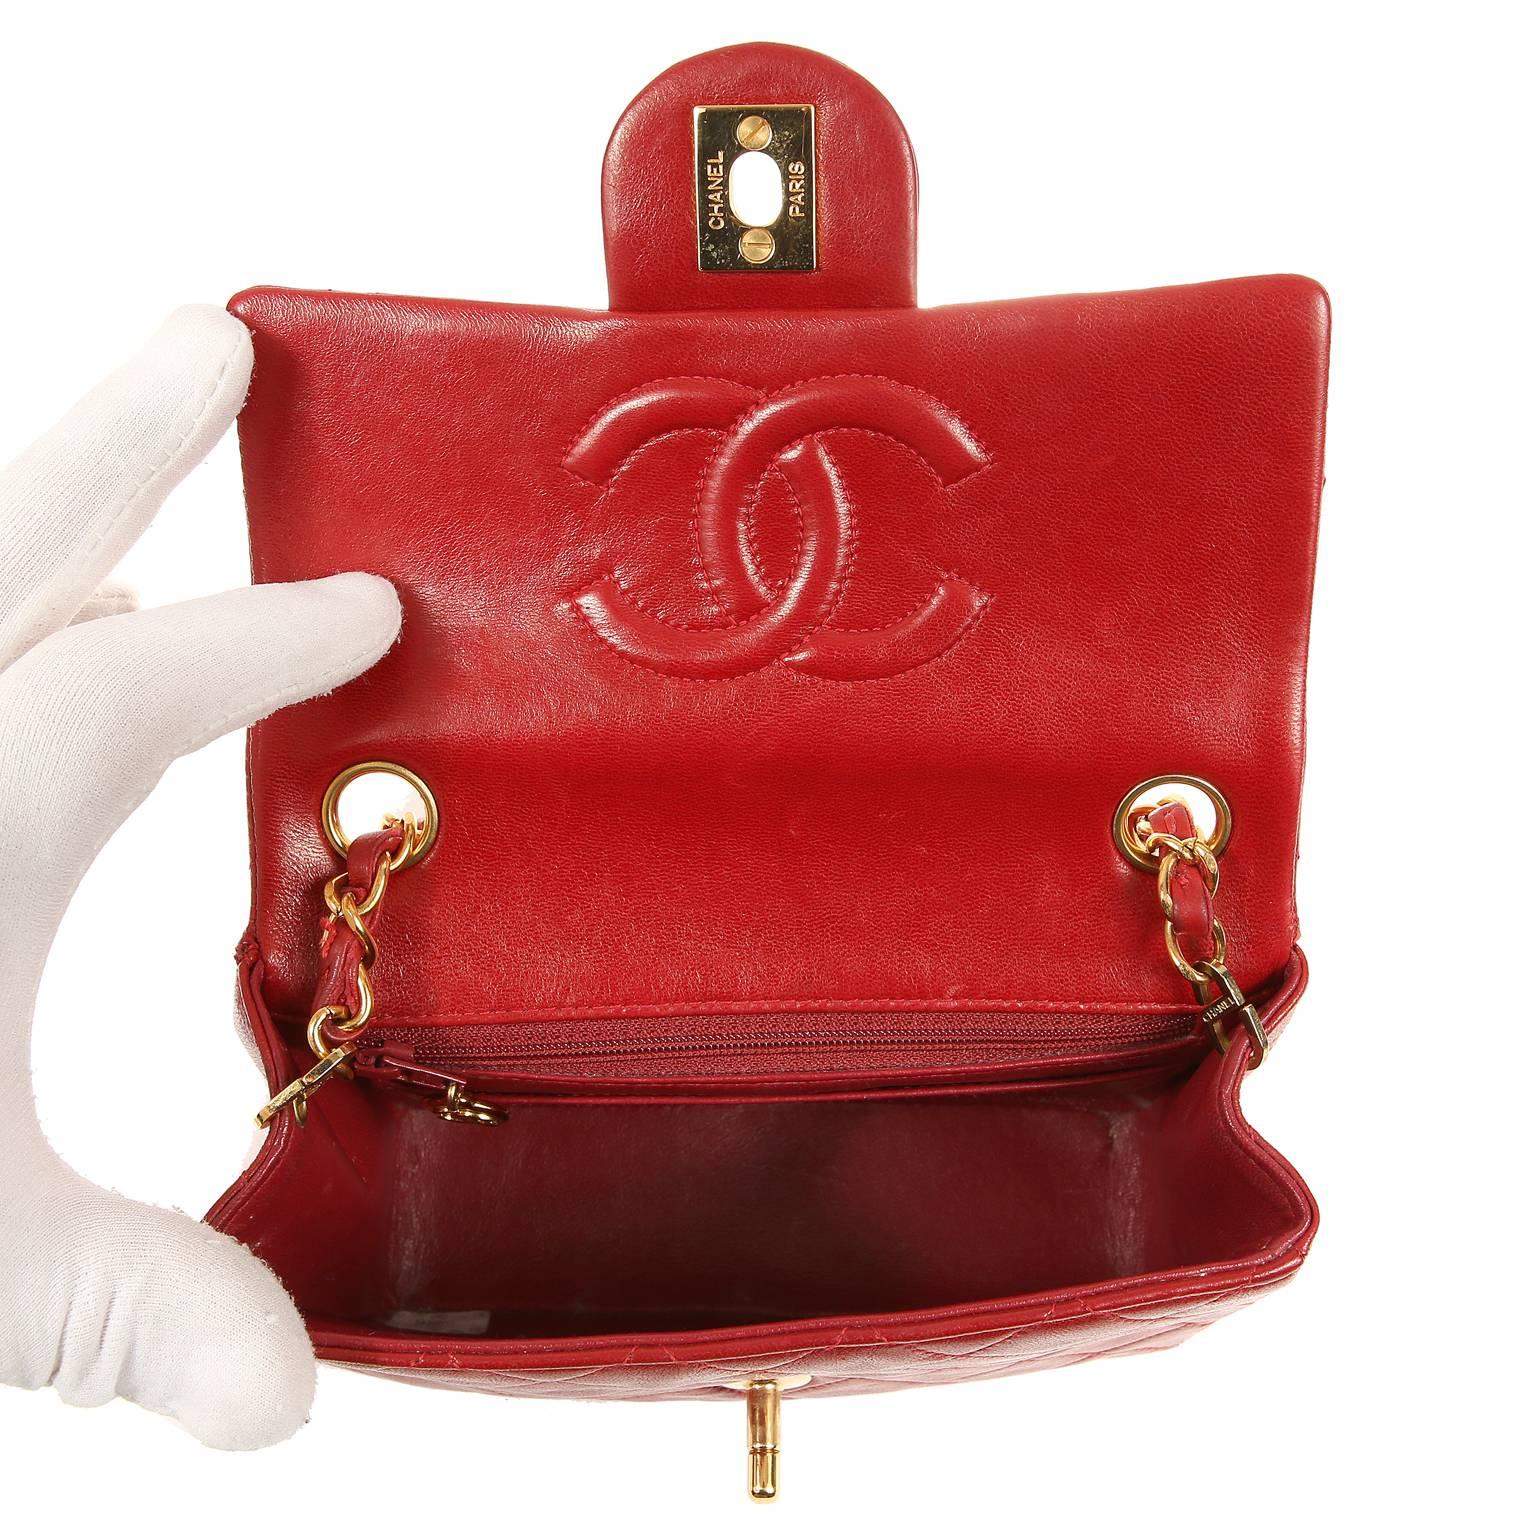 Chanel Red Lambskin Mini Classic Flap bag with GHW 3